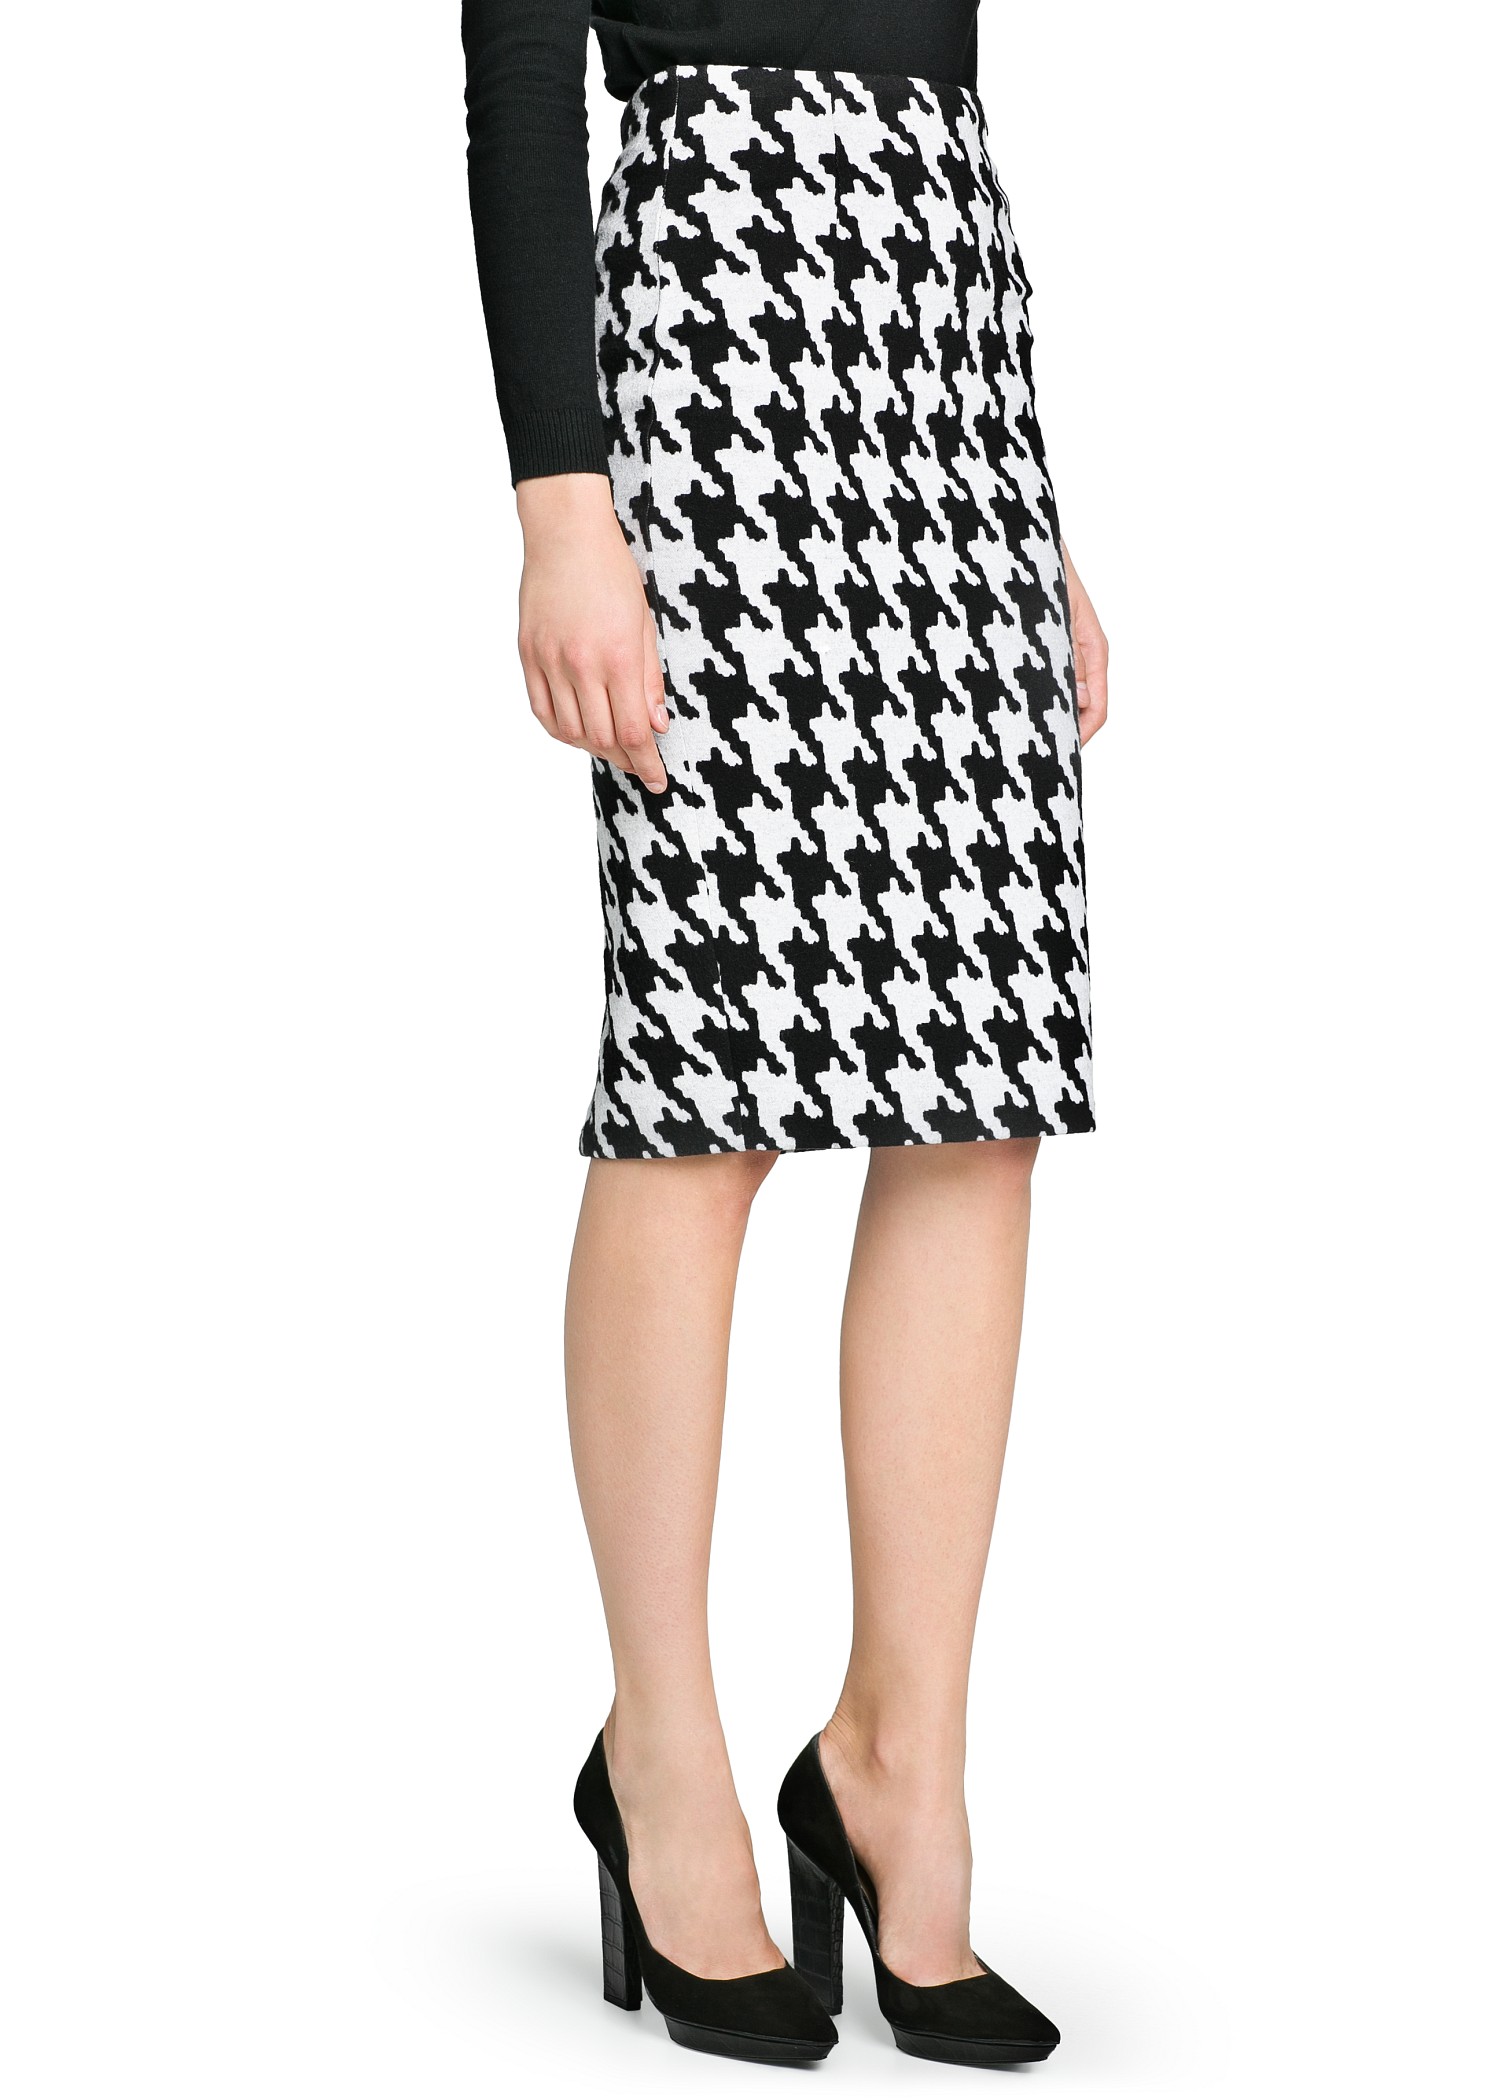 Mango Houndstooth Pencil Skirt in Black (White) - Lyst